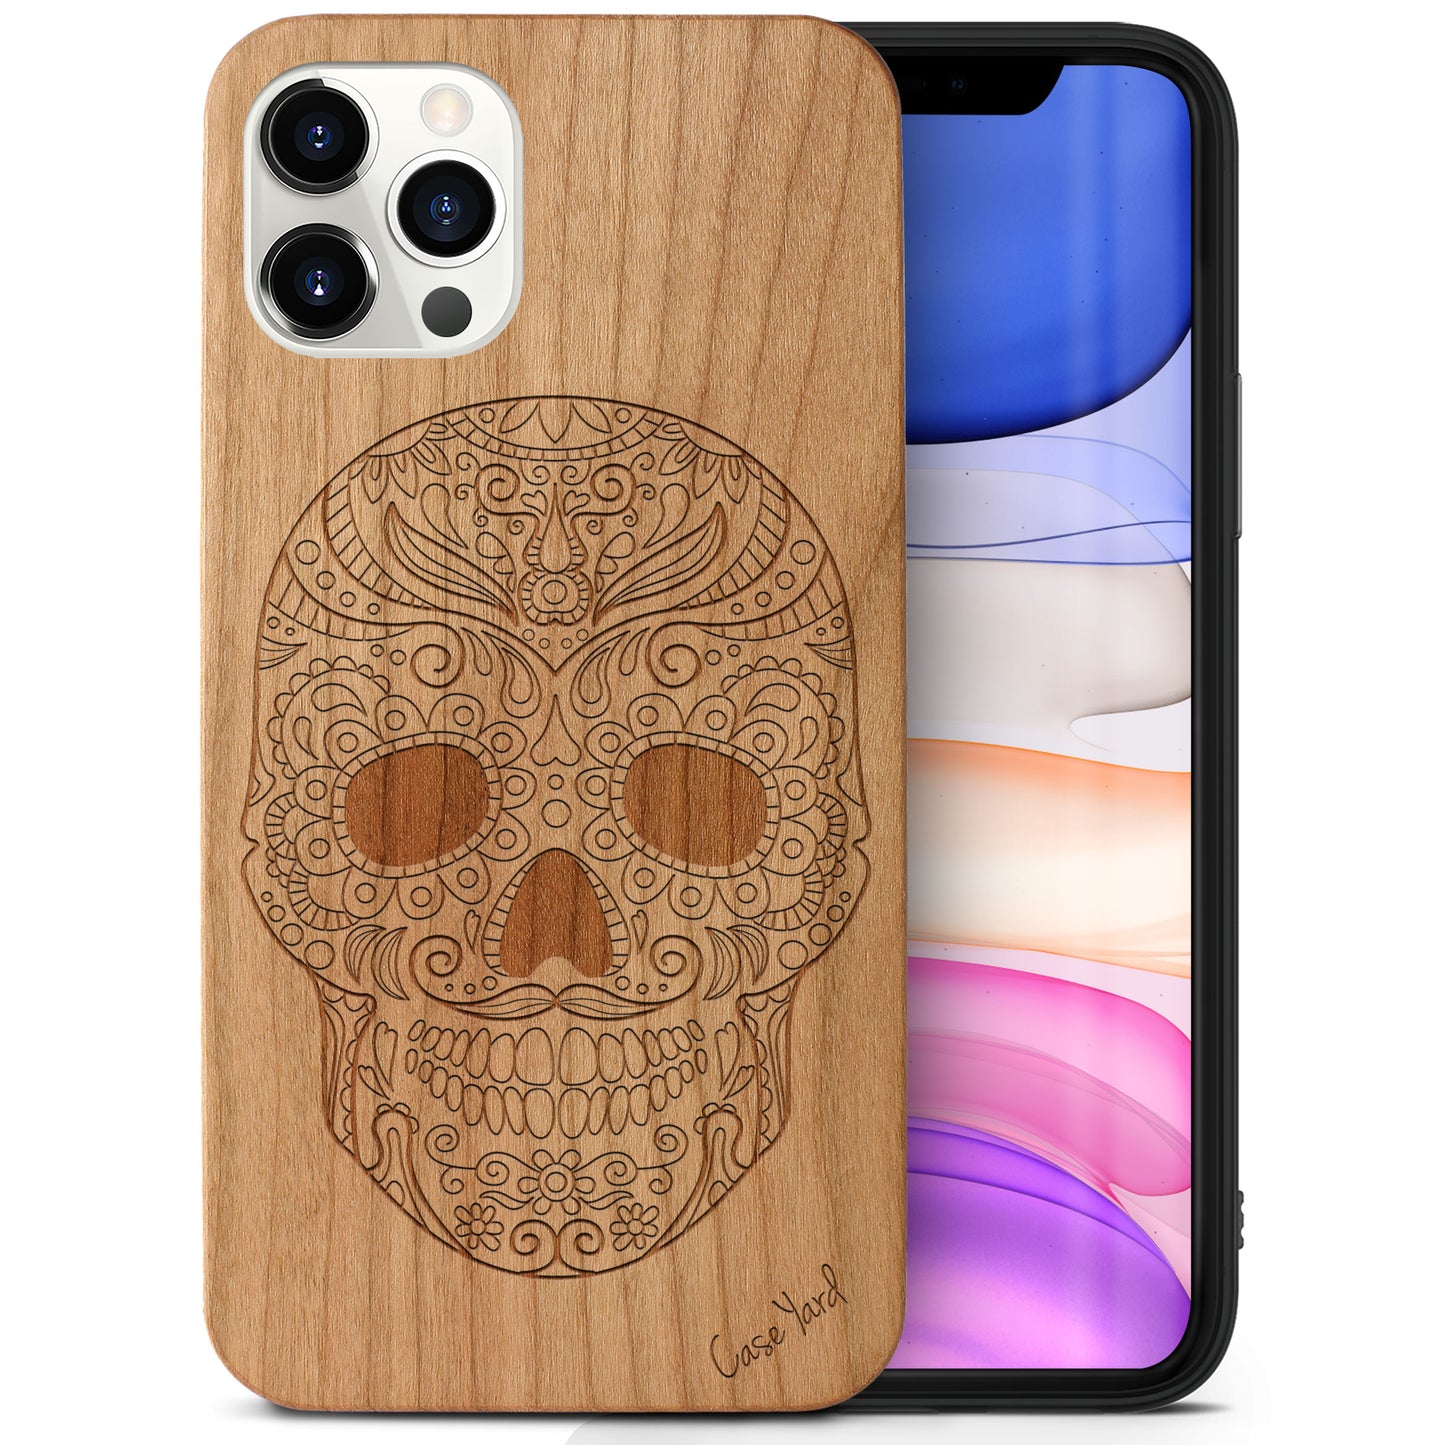 Wooden Cell Phone Case Cover, Laser Engraved case for iPhone & Samsung phone Sugar Skull Wood Design